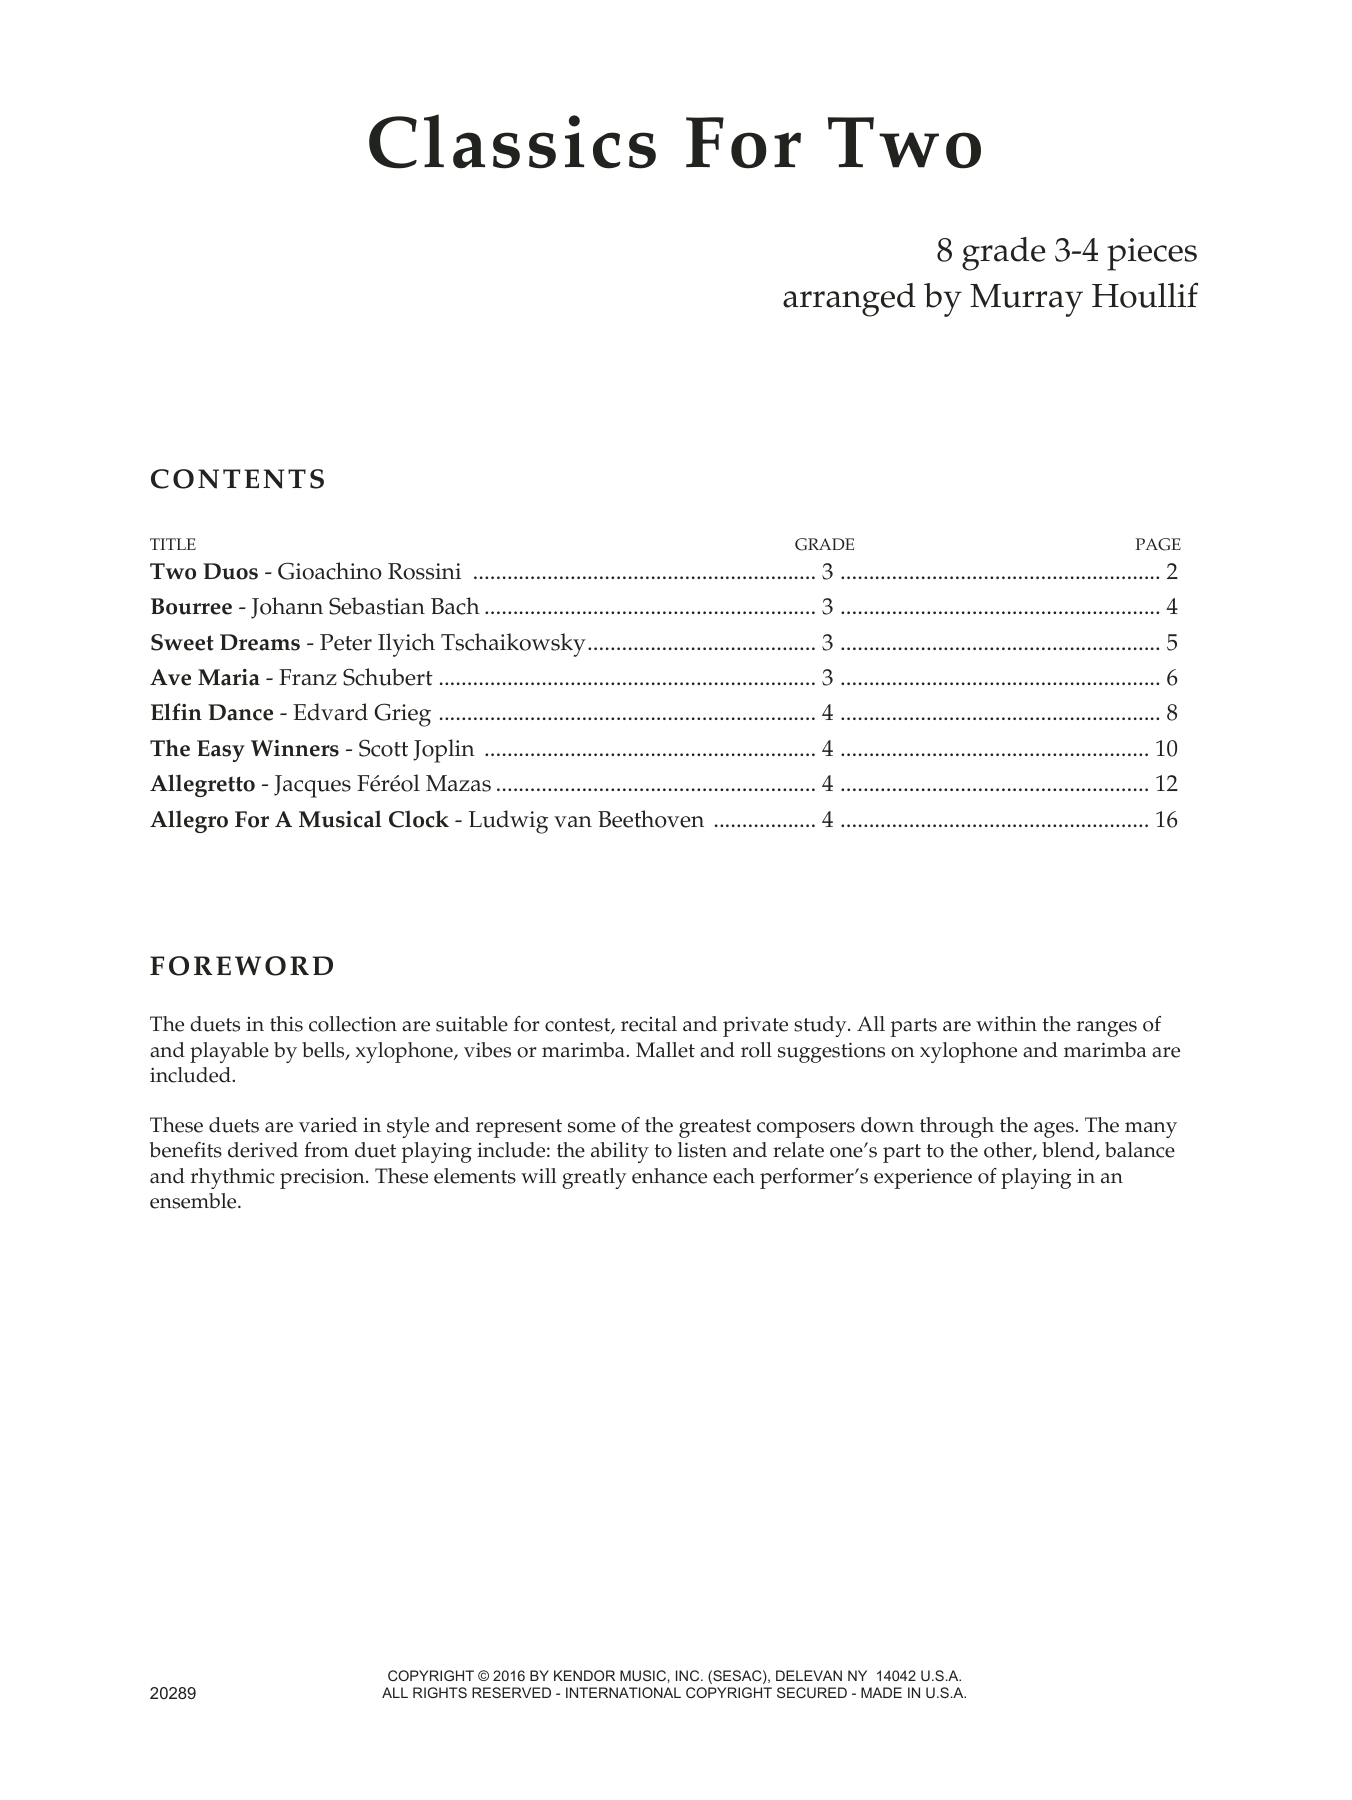 Download Murray Houllif Classics For Two Sheet Music